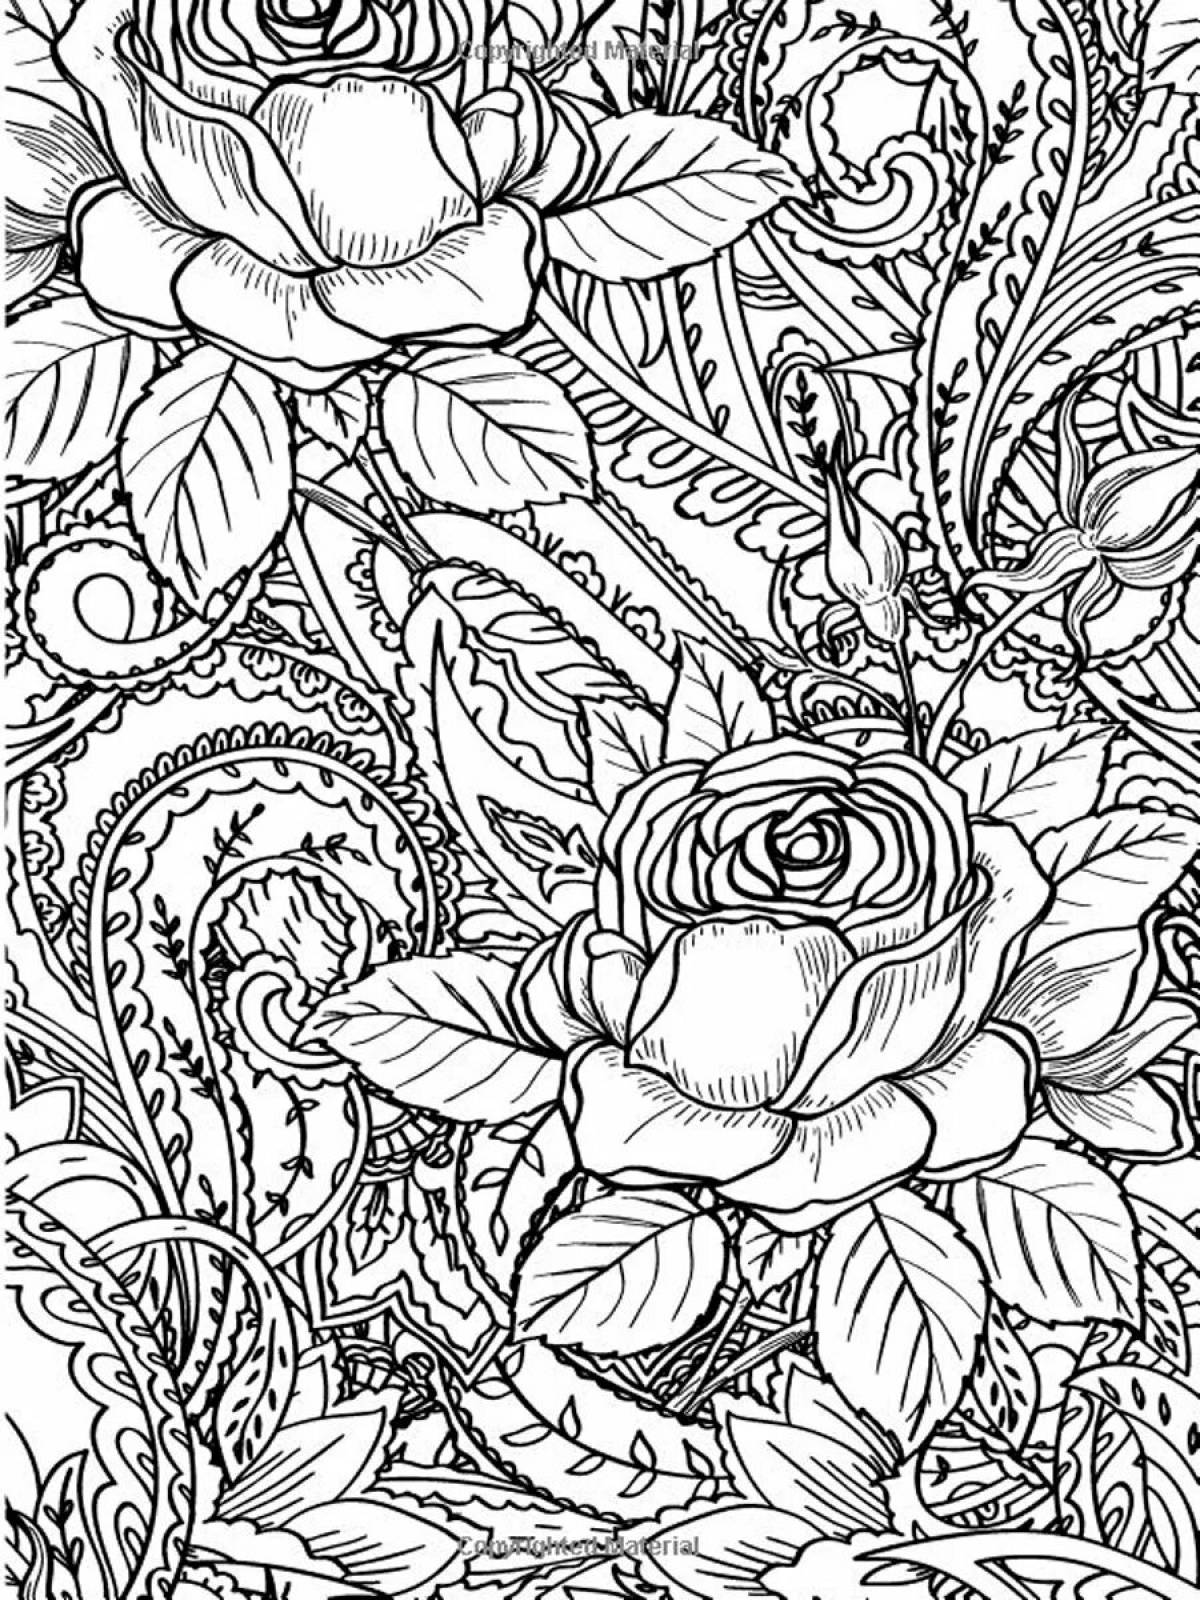 Colorful adult coloring page